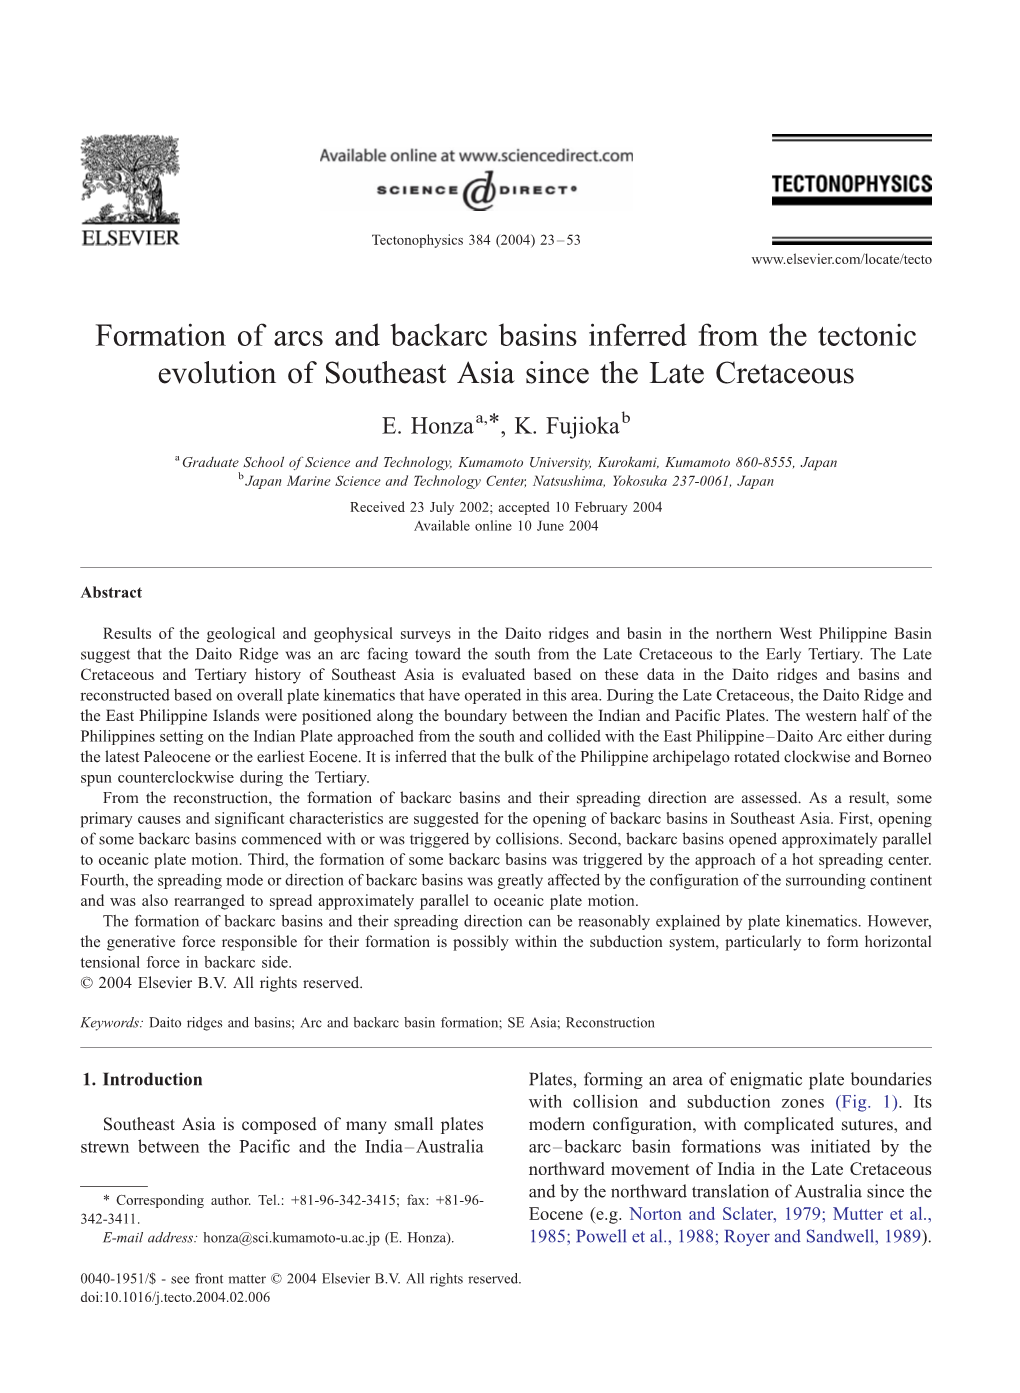 Formation of Arcs and Backarc Basins Inferred from the Tectonic Evolution of Southeast Asia Since the Late Cretaceous